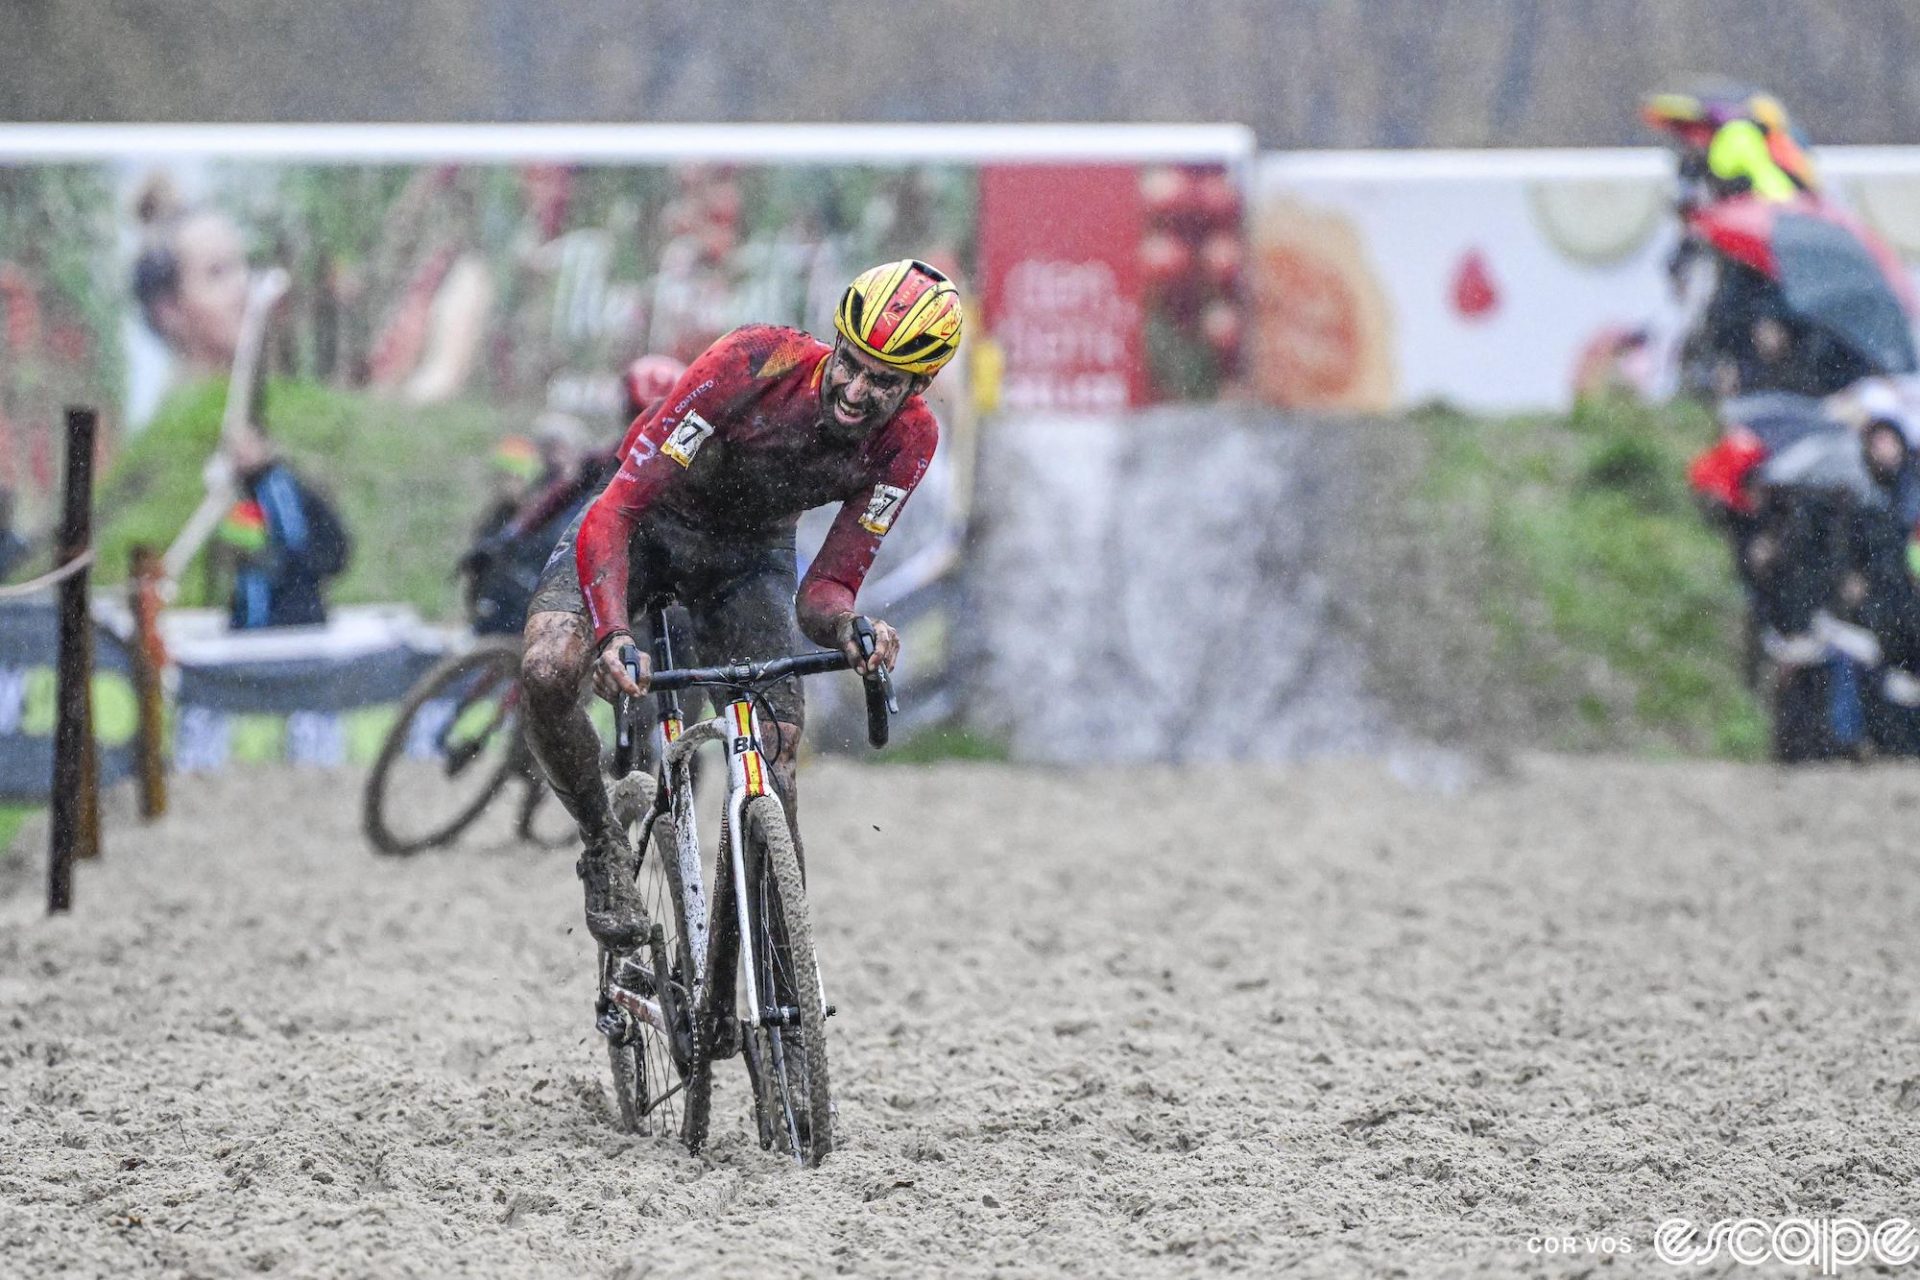 Felipe Orts grimaces as he leans his bike for balance while riding in the sand pit. The sand is deep, almost up to his rear derailleur pulley cage.